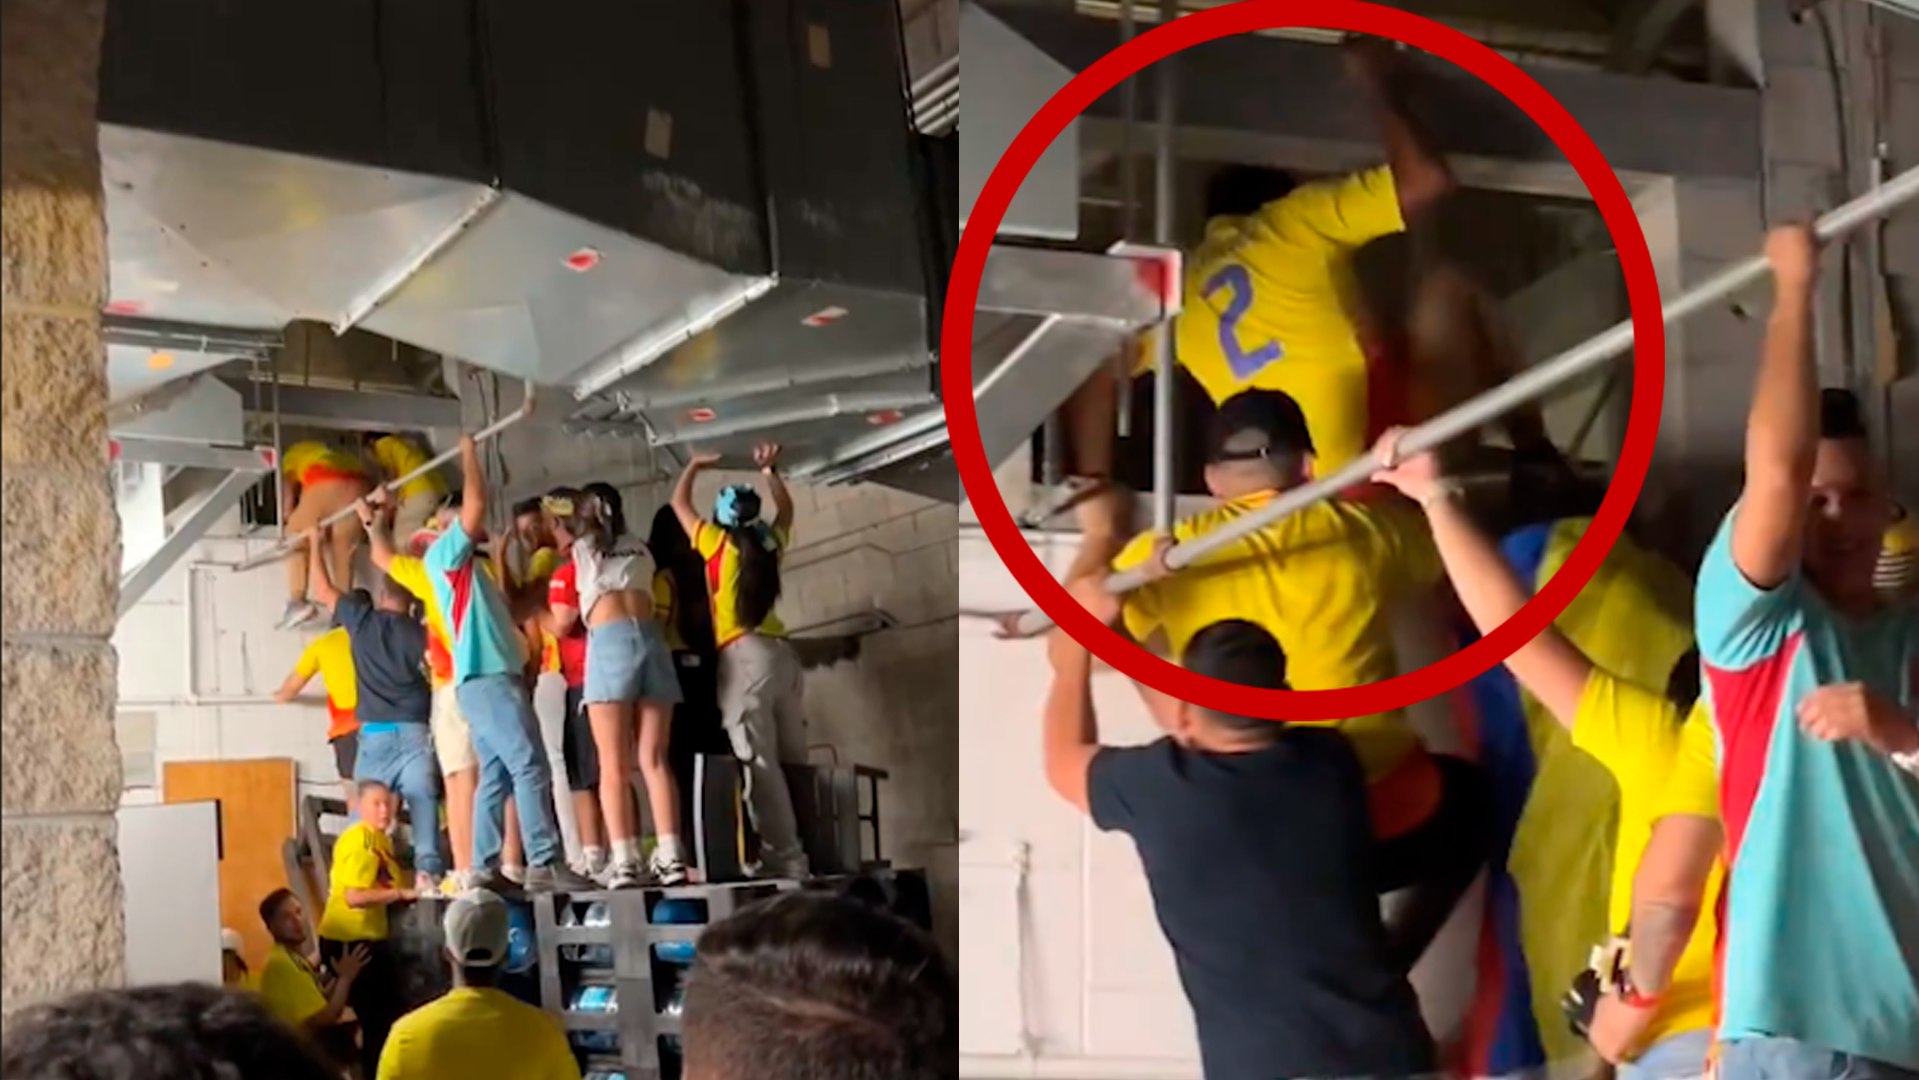 Fans Climb Ventilation Ducts to Enter Copa America Final at Football Stadium